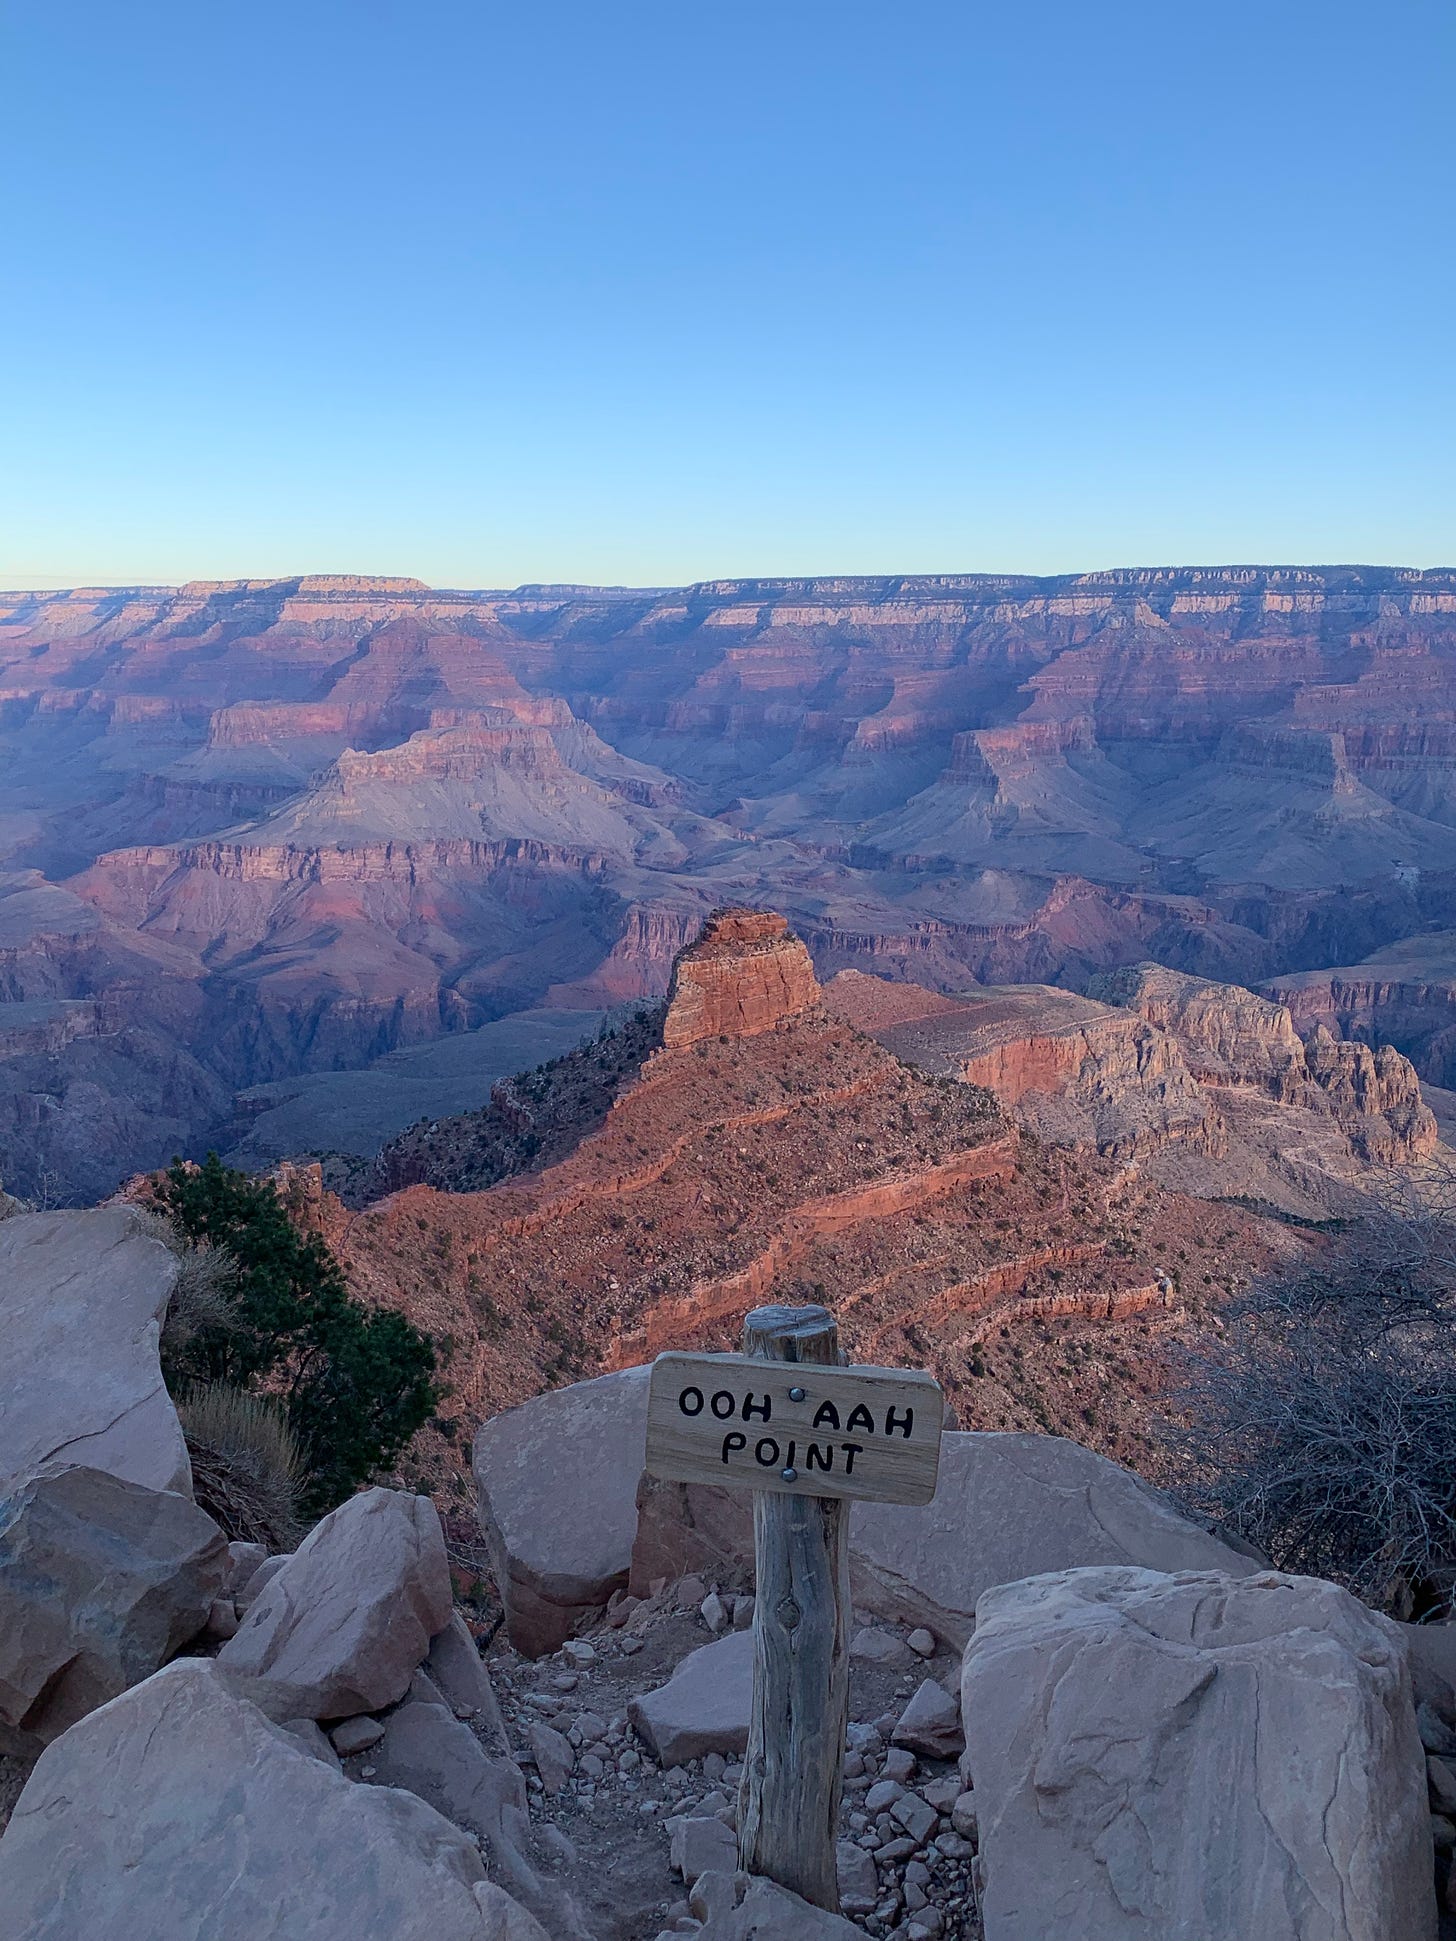 A sign says "Ooh Aah Point" above the Grand Canyon at dawn